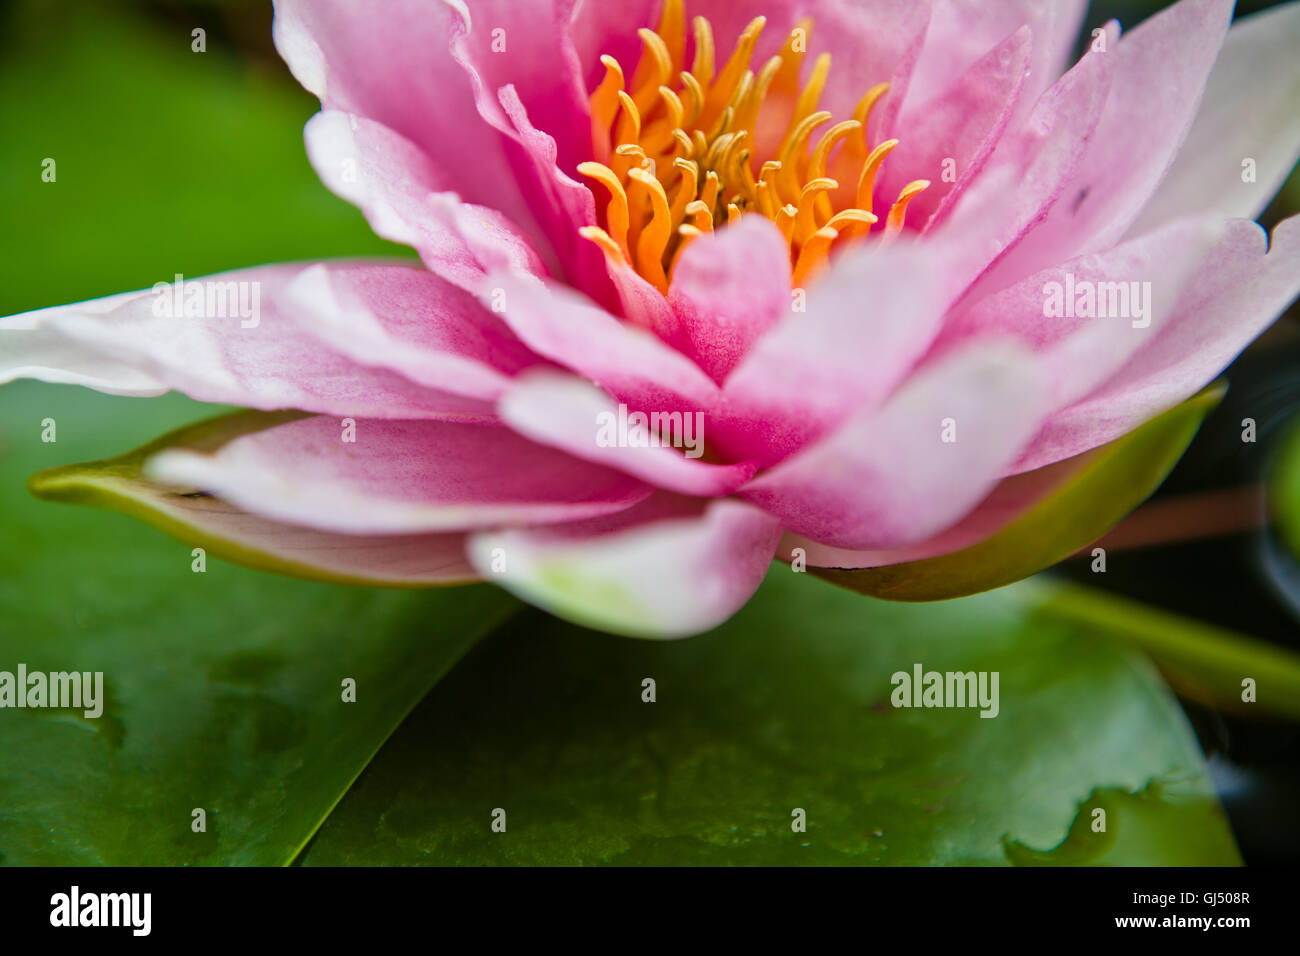 Macro Photograph of a pink Water Lilly Bloom Stock Photo